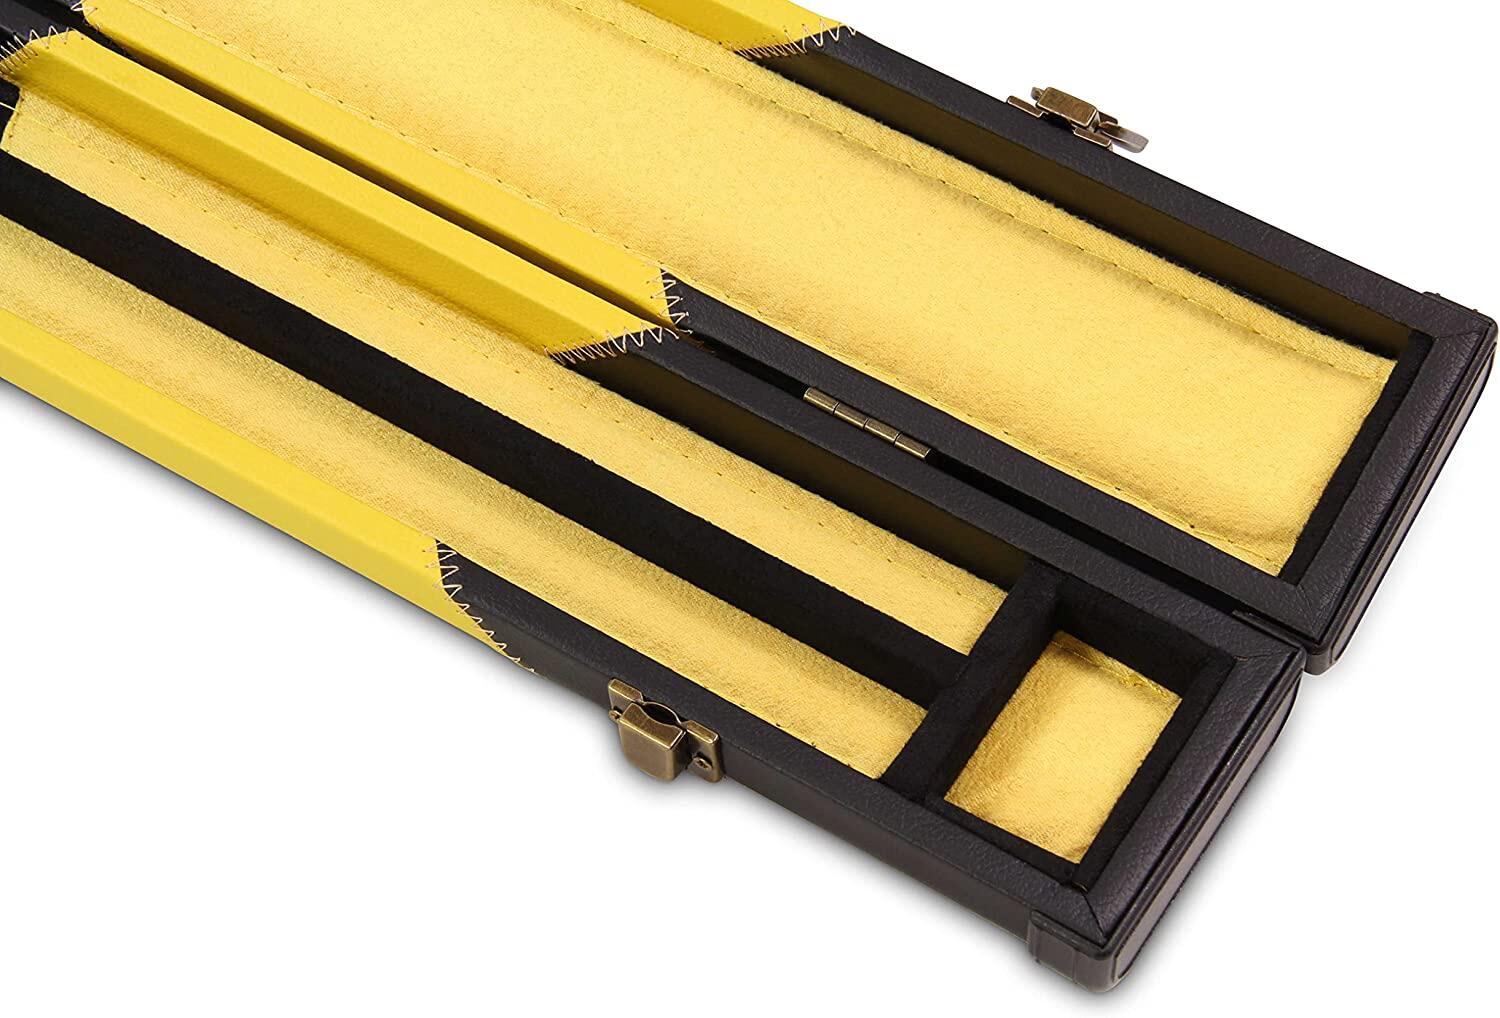 BAIZE MASTER YELLOW ARROW Deluxe 2pc Snooker Pool Cue Case with Matching Coloure 5/7